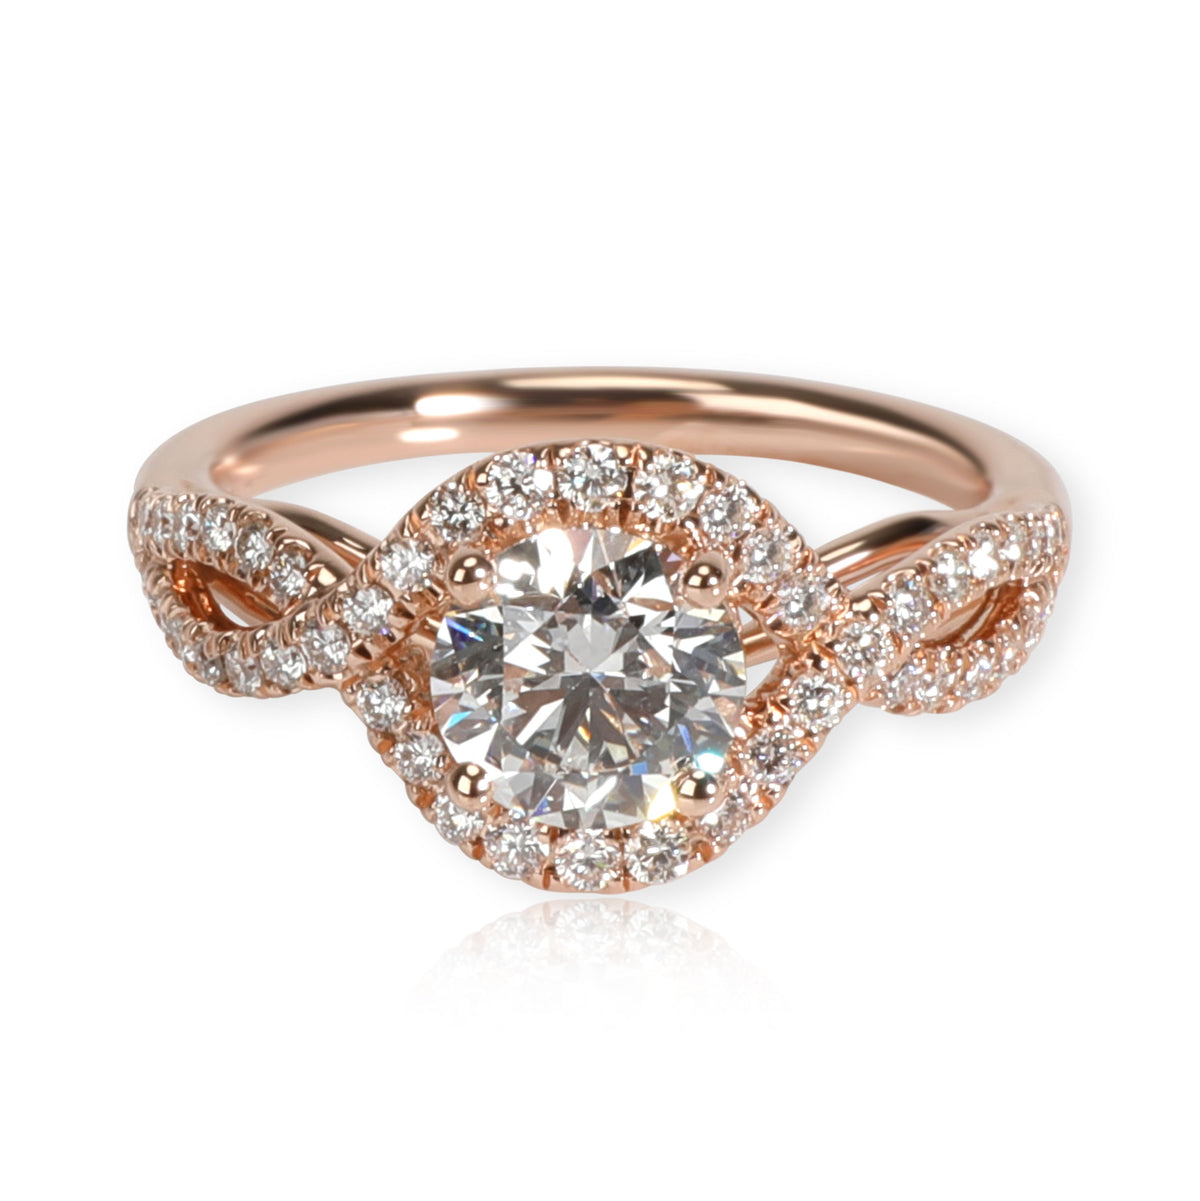 Coast Halo Diamond Engagement Ring in 14K Rose Gold GIA Certified E SI1 1.05 CTW